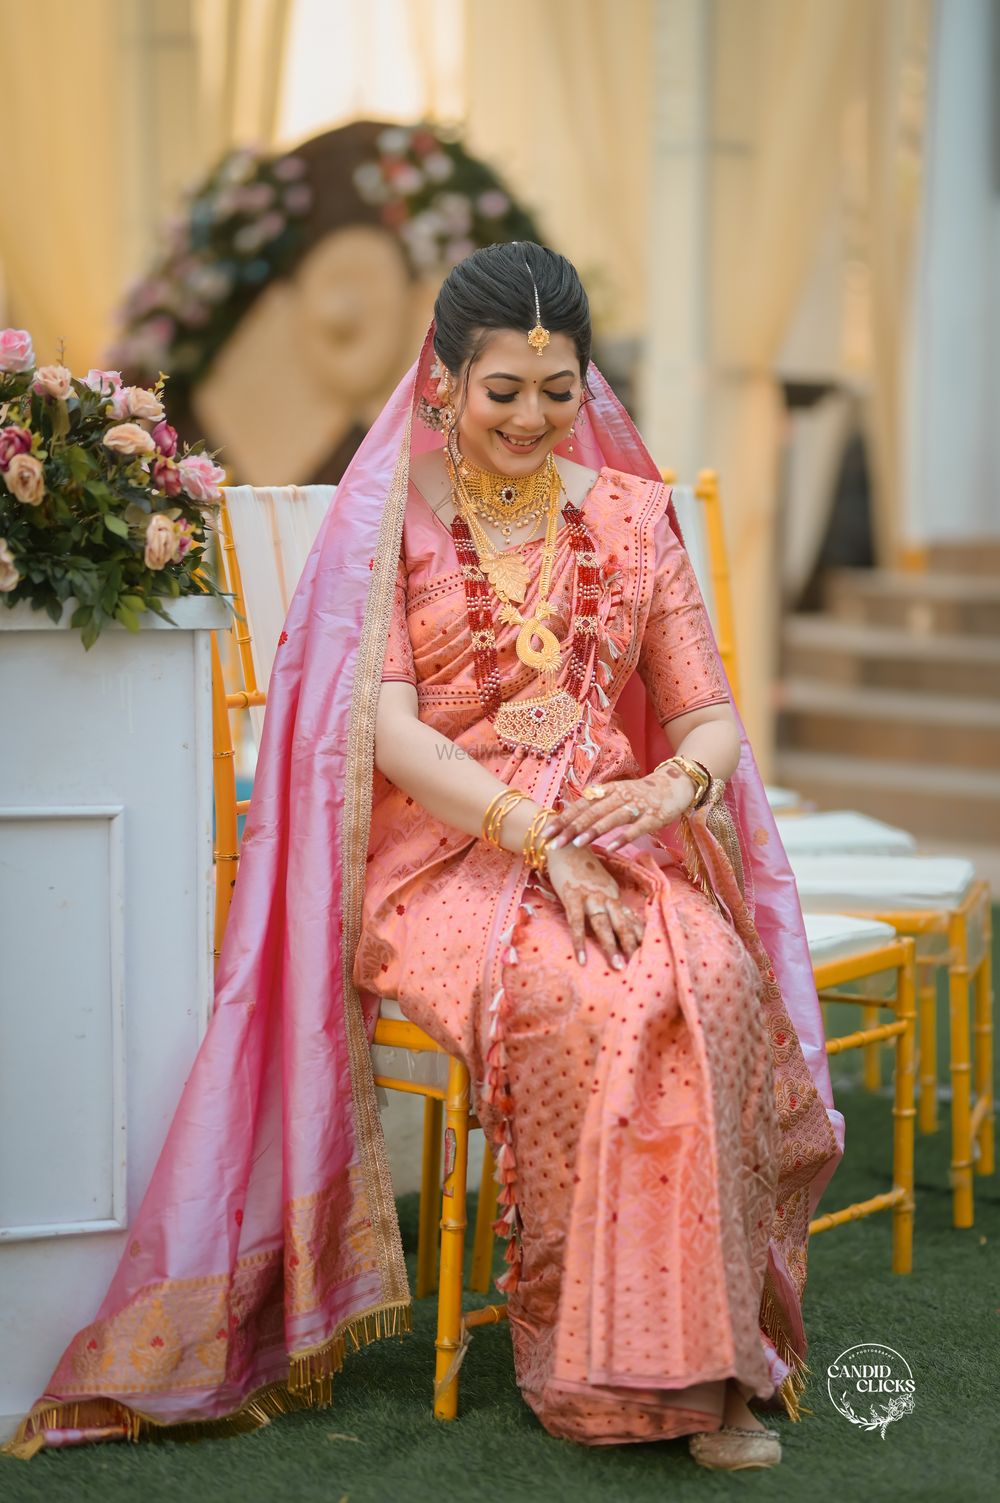 Photo From wedding 2024 - By Weddingscandidclicks